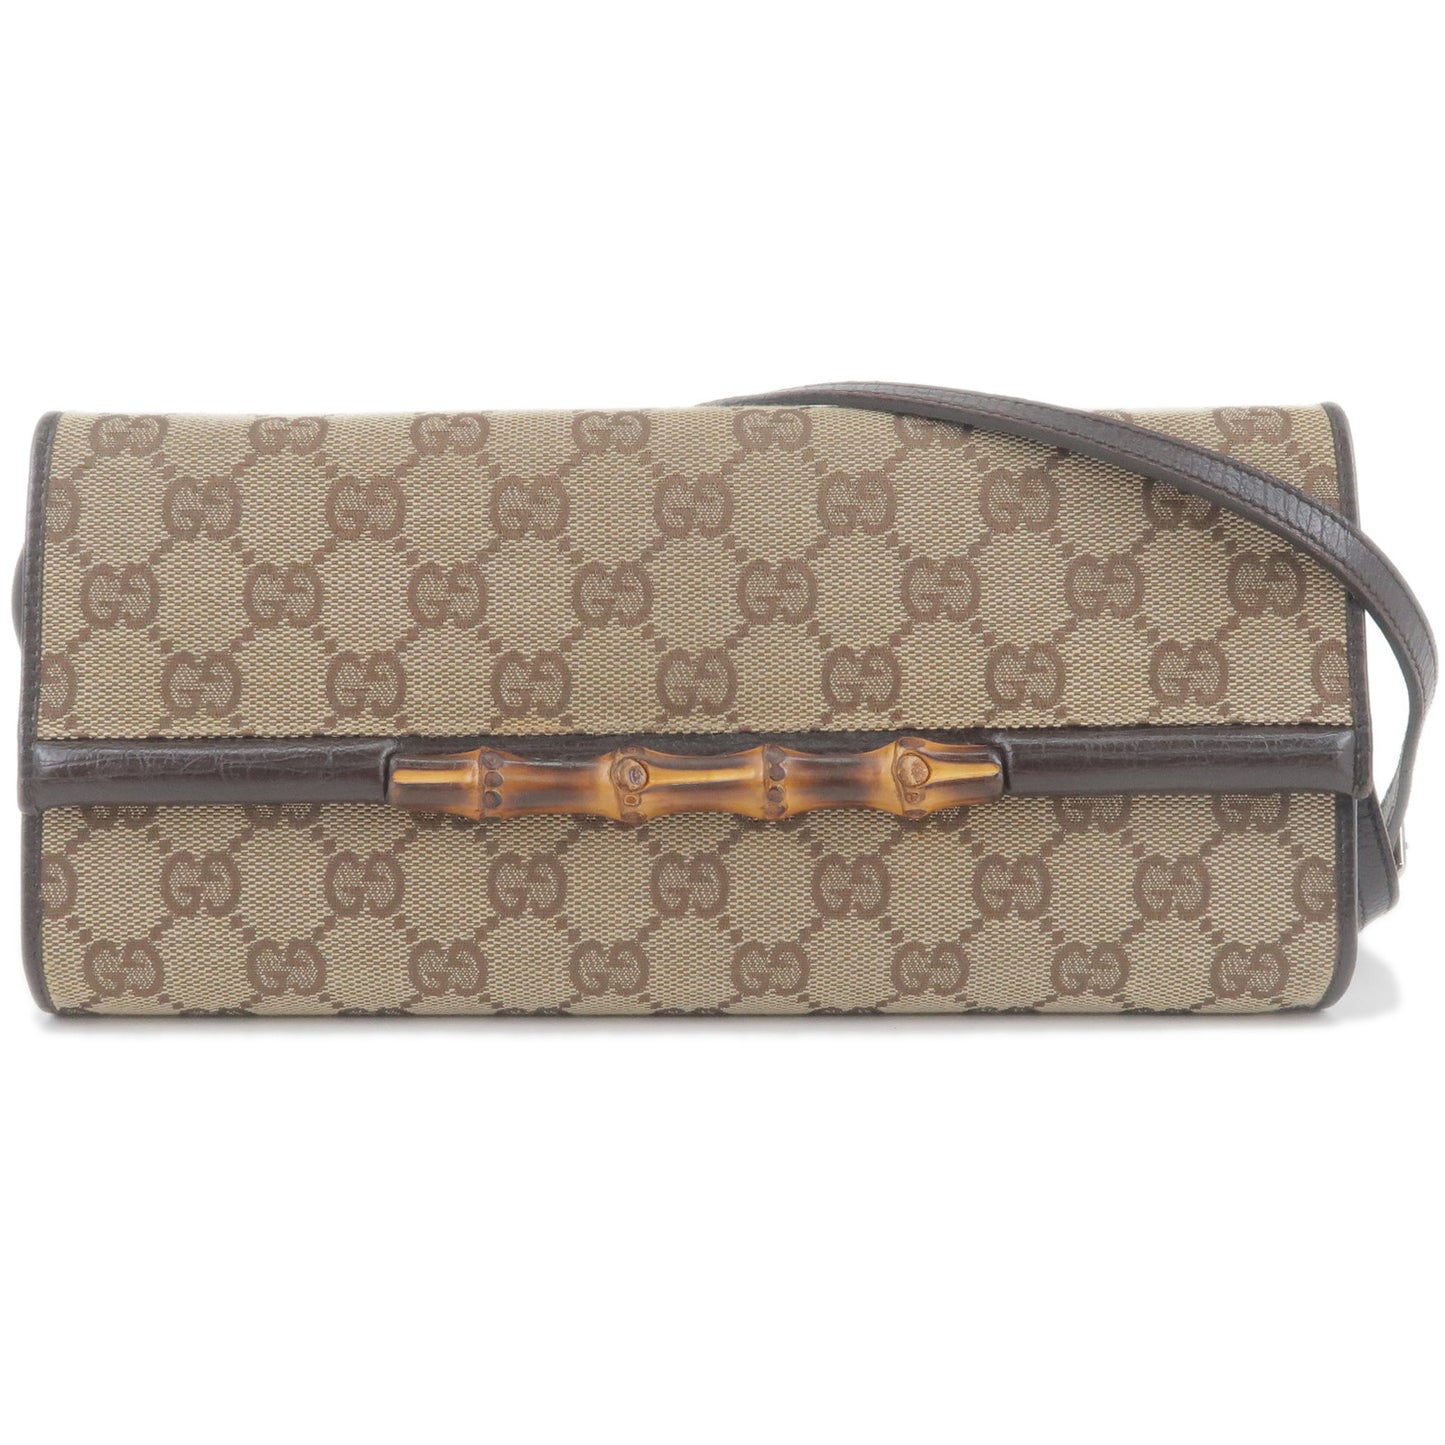 GUCCI-Bamboo-GG-Canvas-Leather-2Way-Shoulder-Bag-Brown-117594